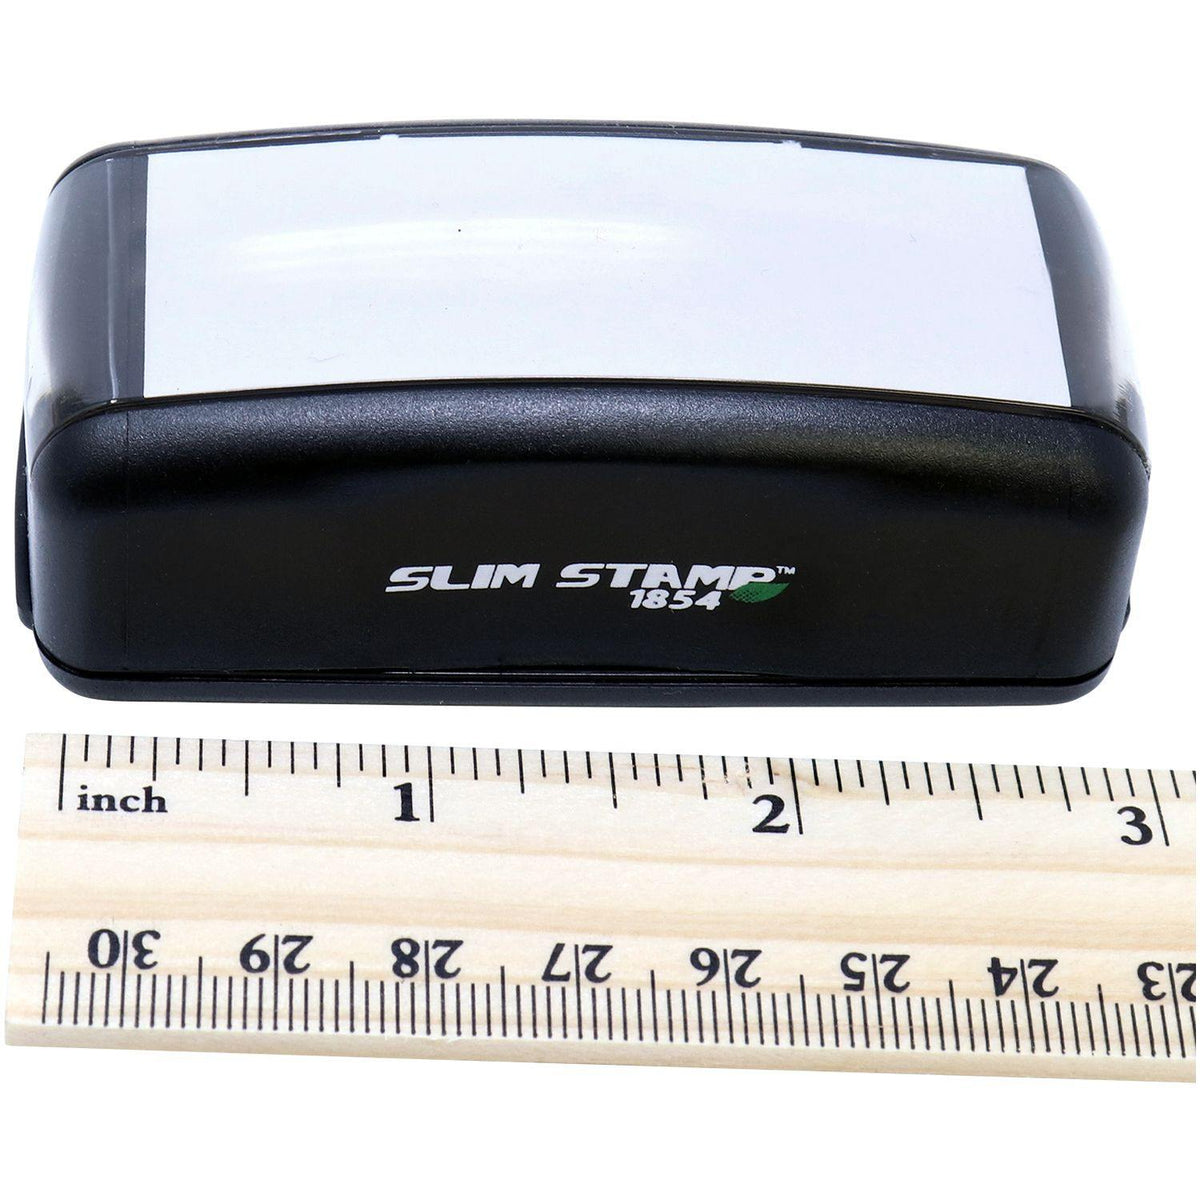 Measurement Large Pre-Inked Bold Allergies Stamp with Ruler